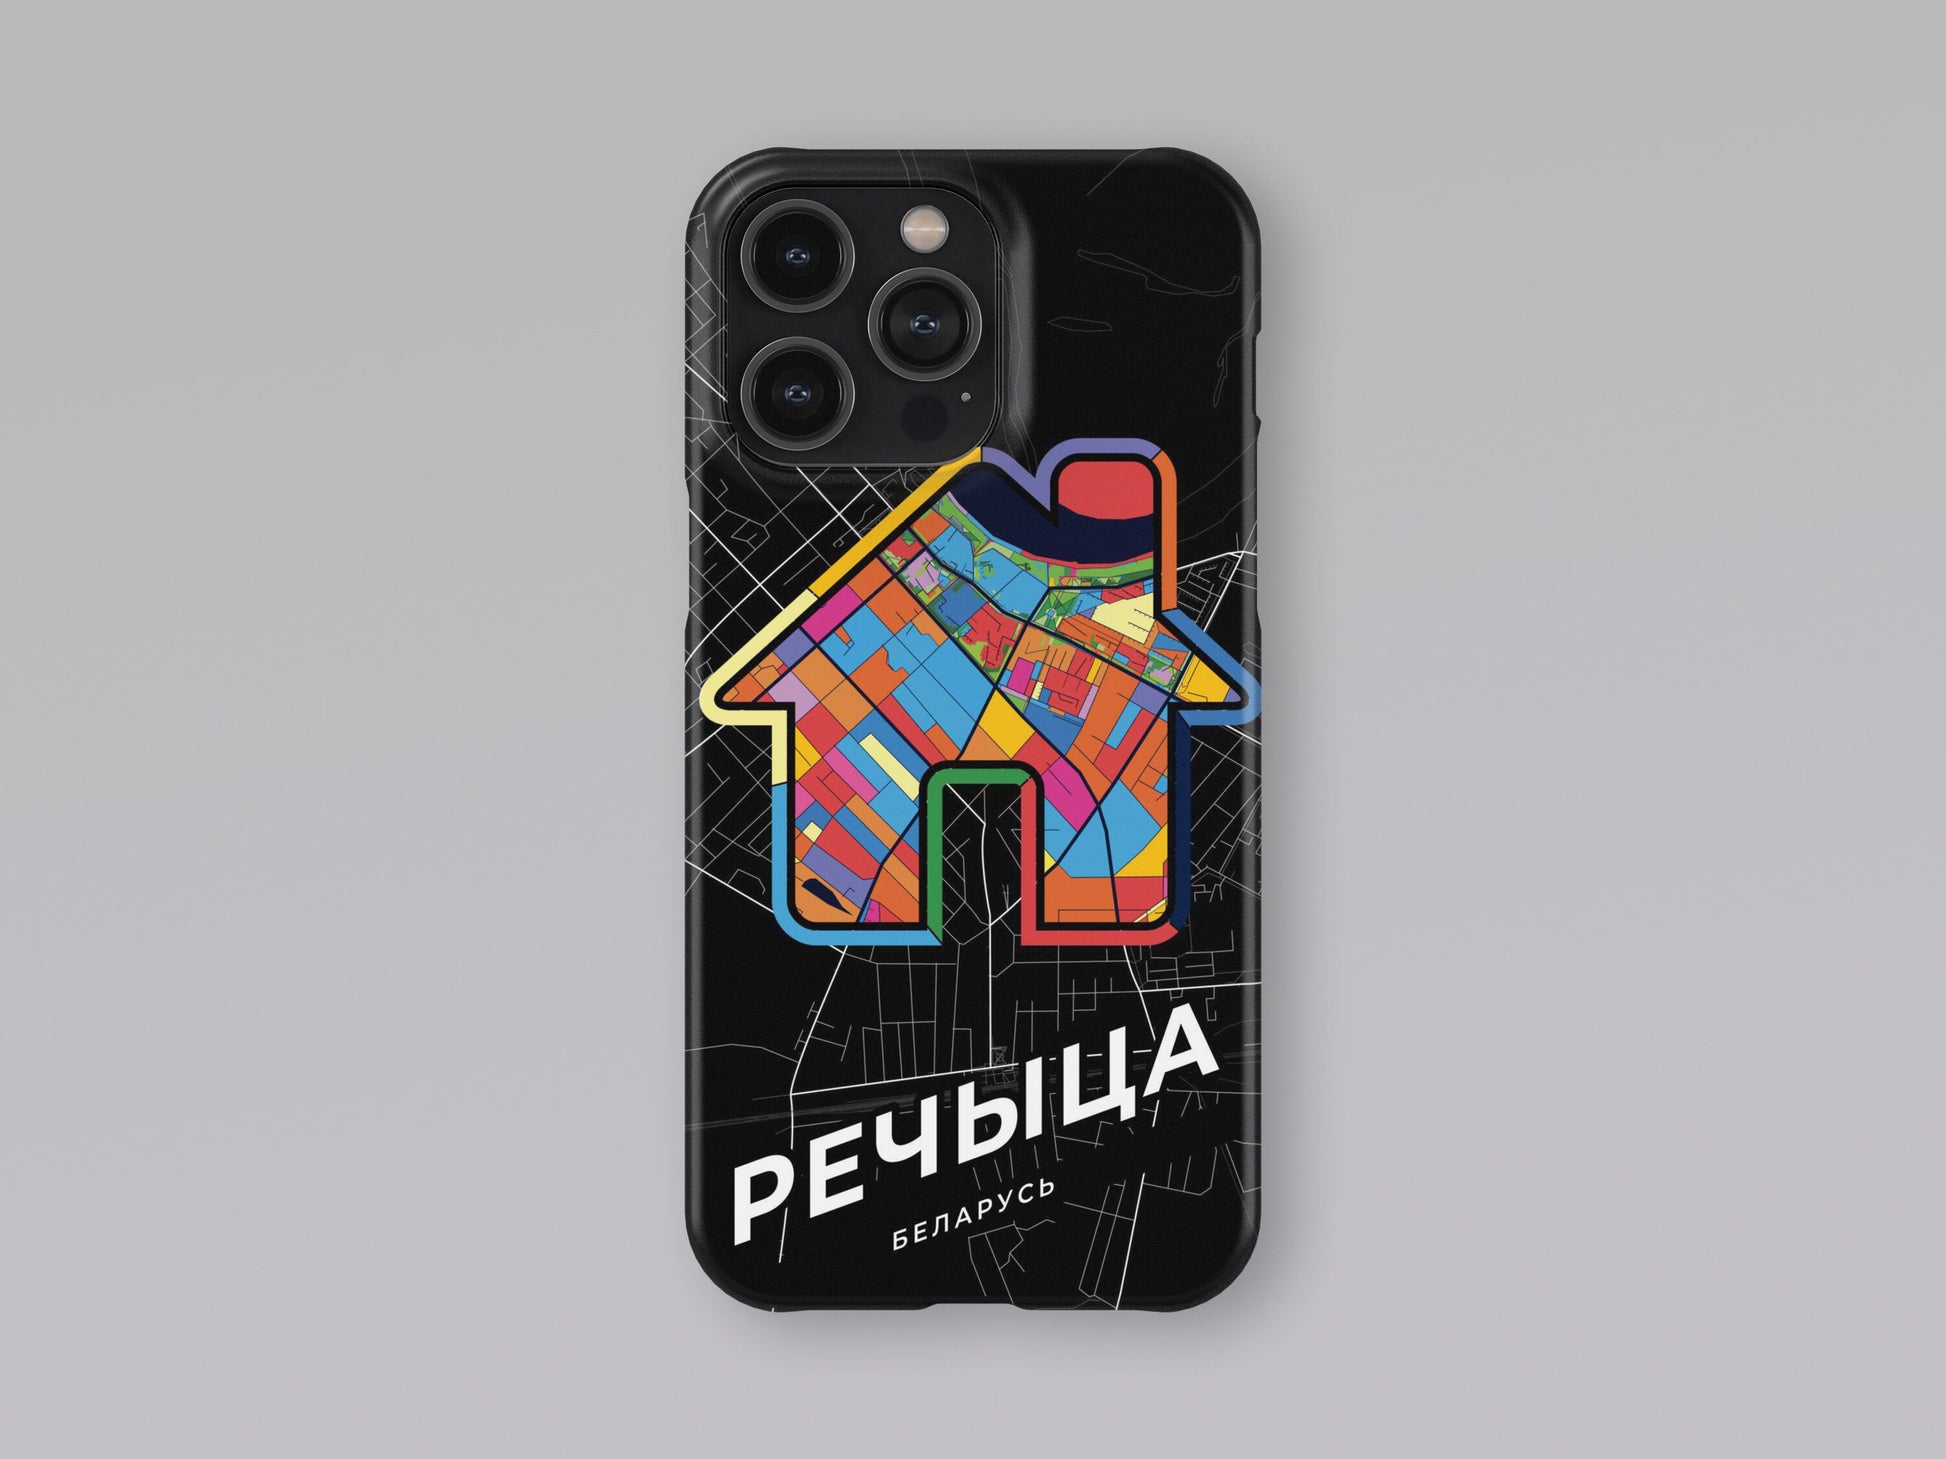 Речыца Беларусь slim phone case with colorful icon. Birthday, wedding or housewarming gift. Couple match cases. 3